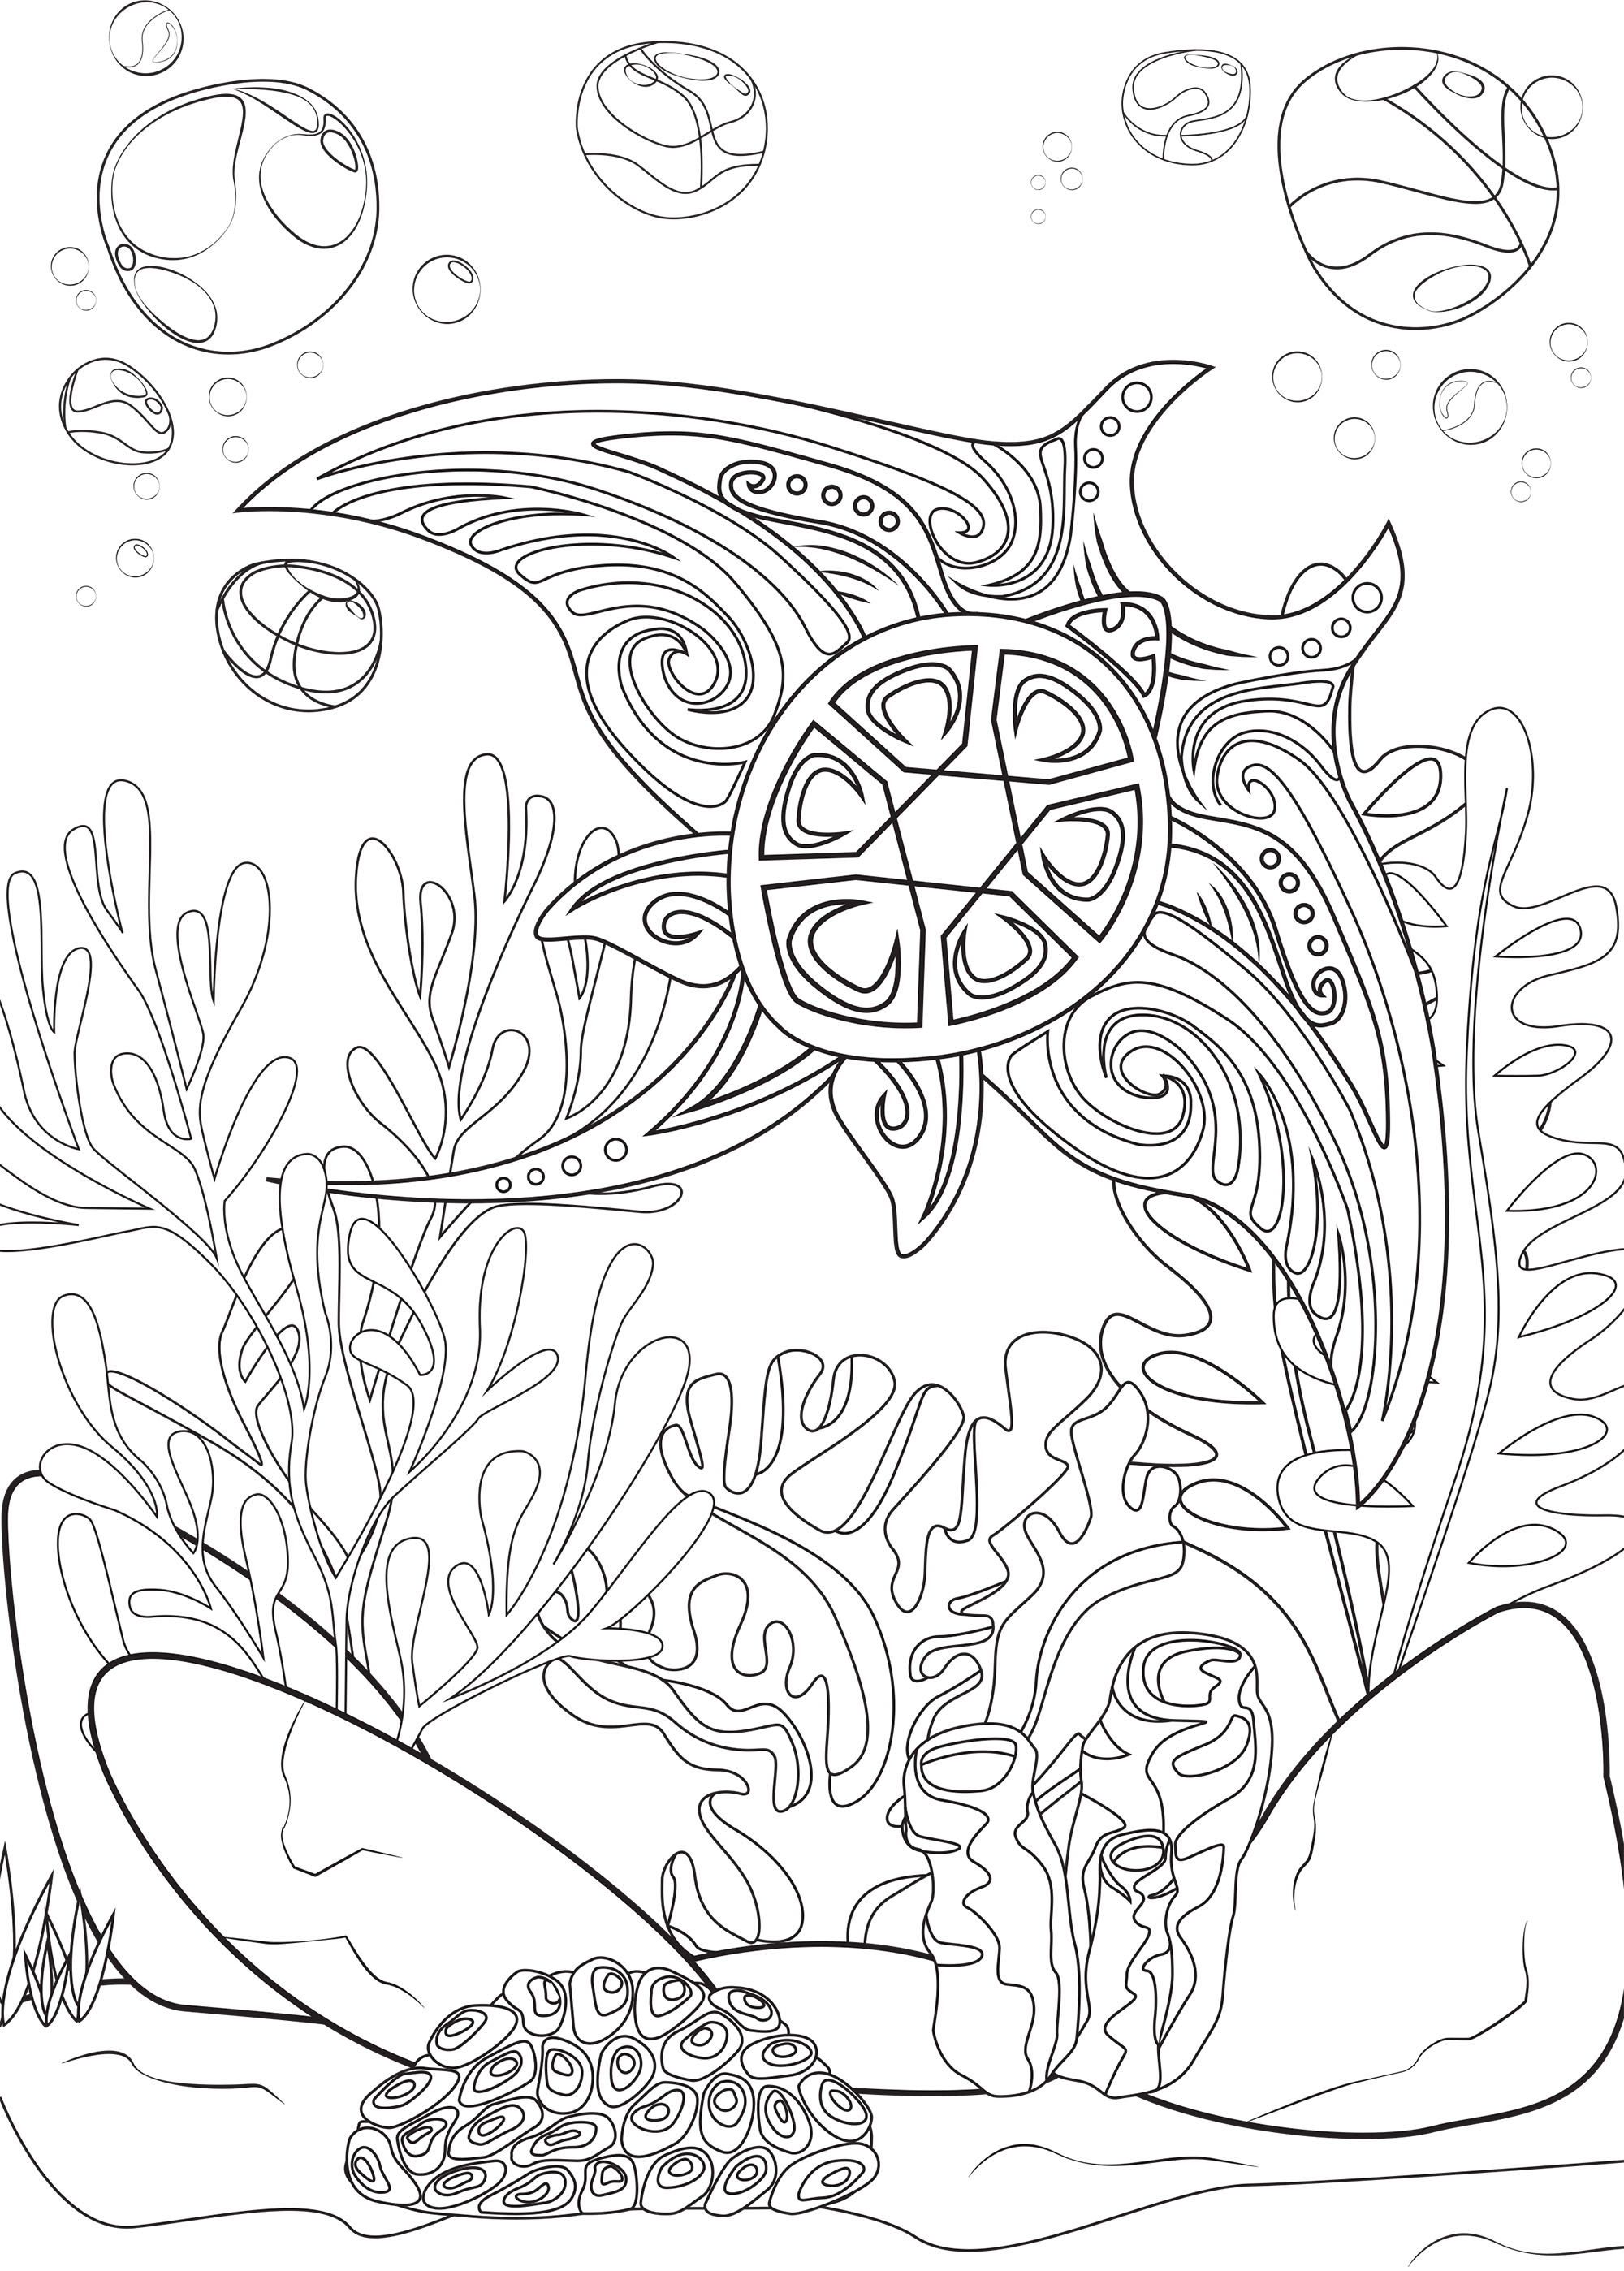 The univers of the manta ray Water worlds Adult Coloring